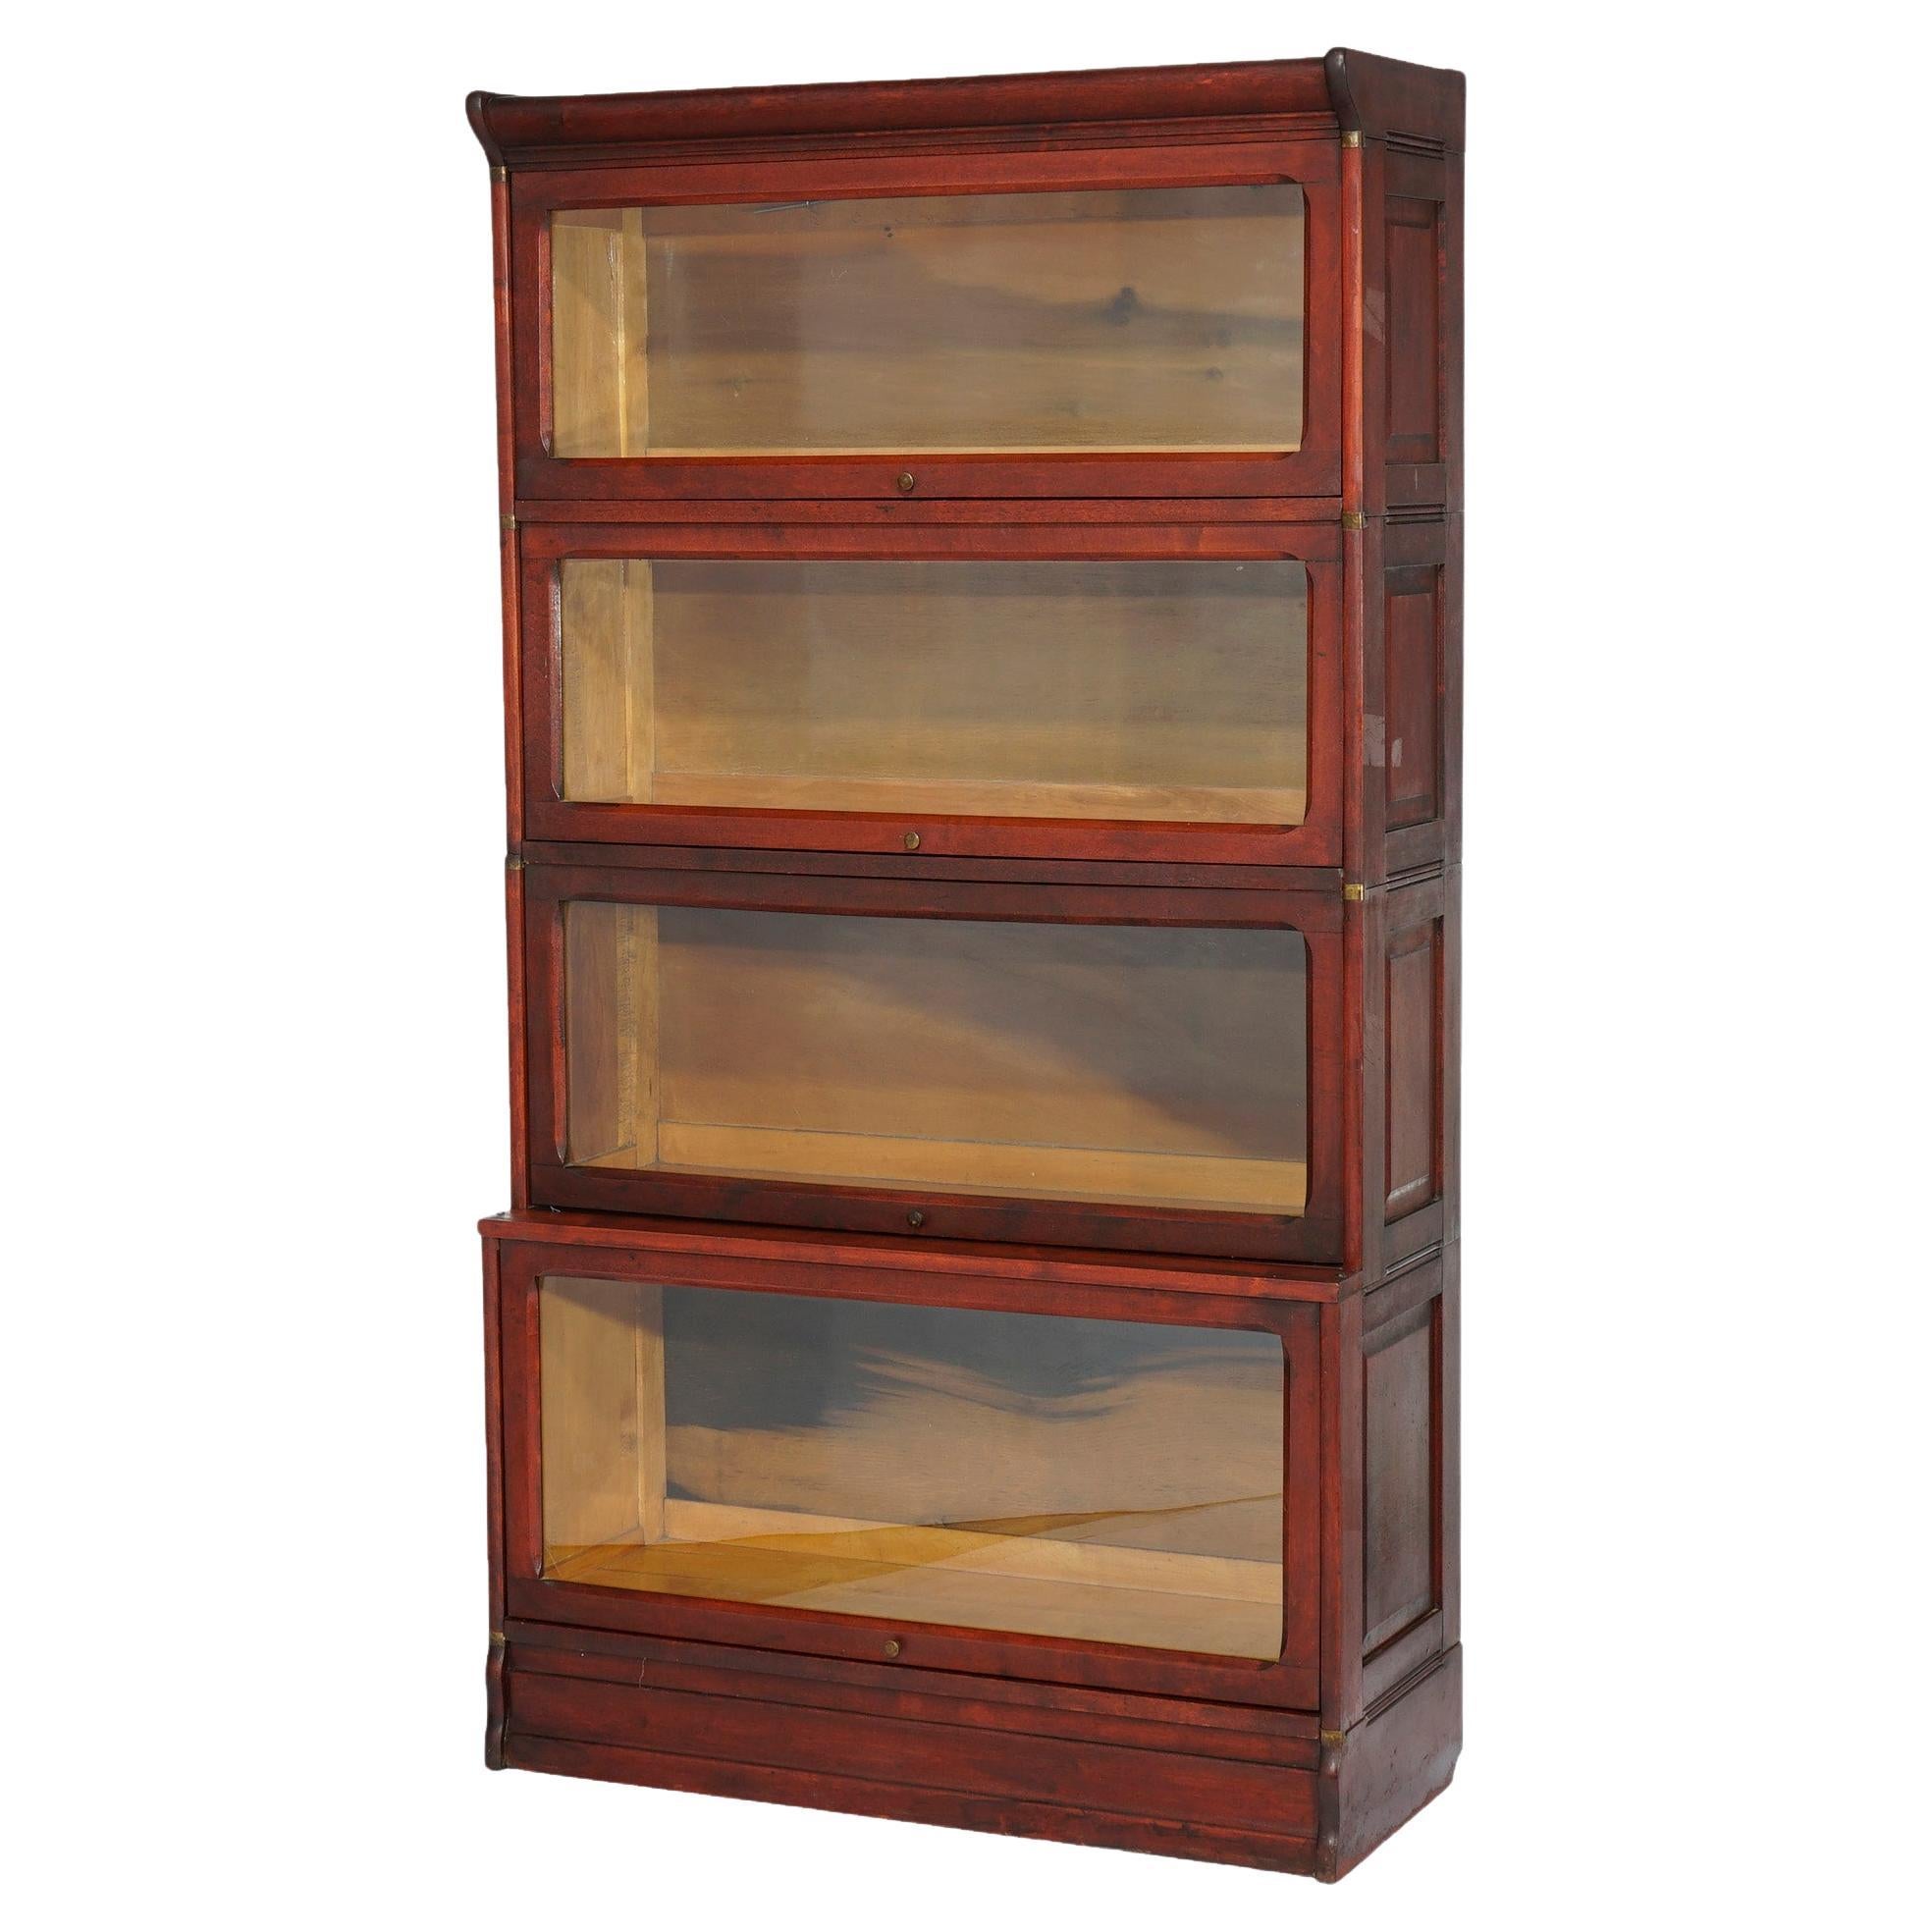 What does barrister bookcase mean?